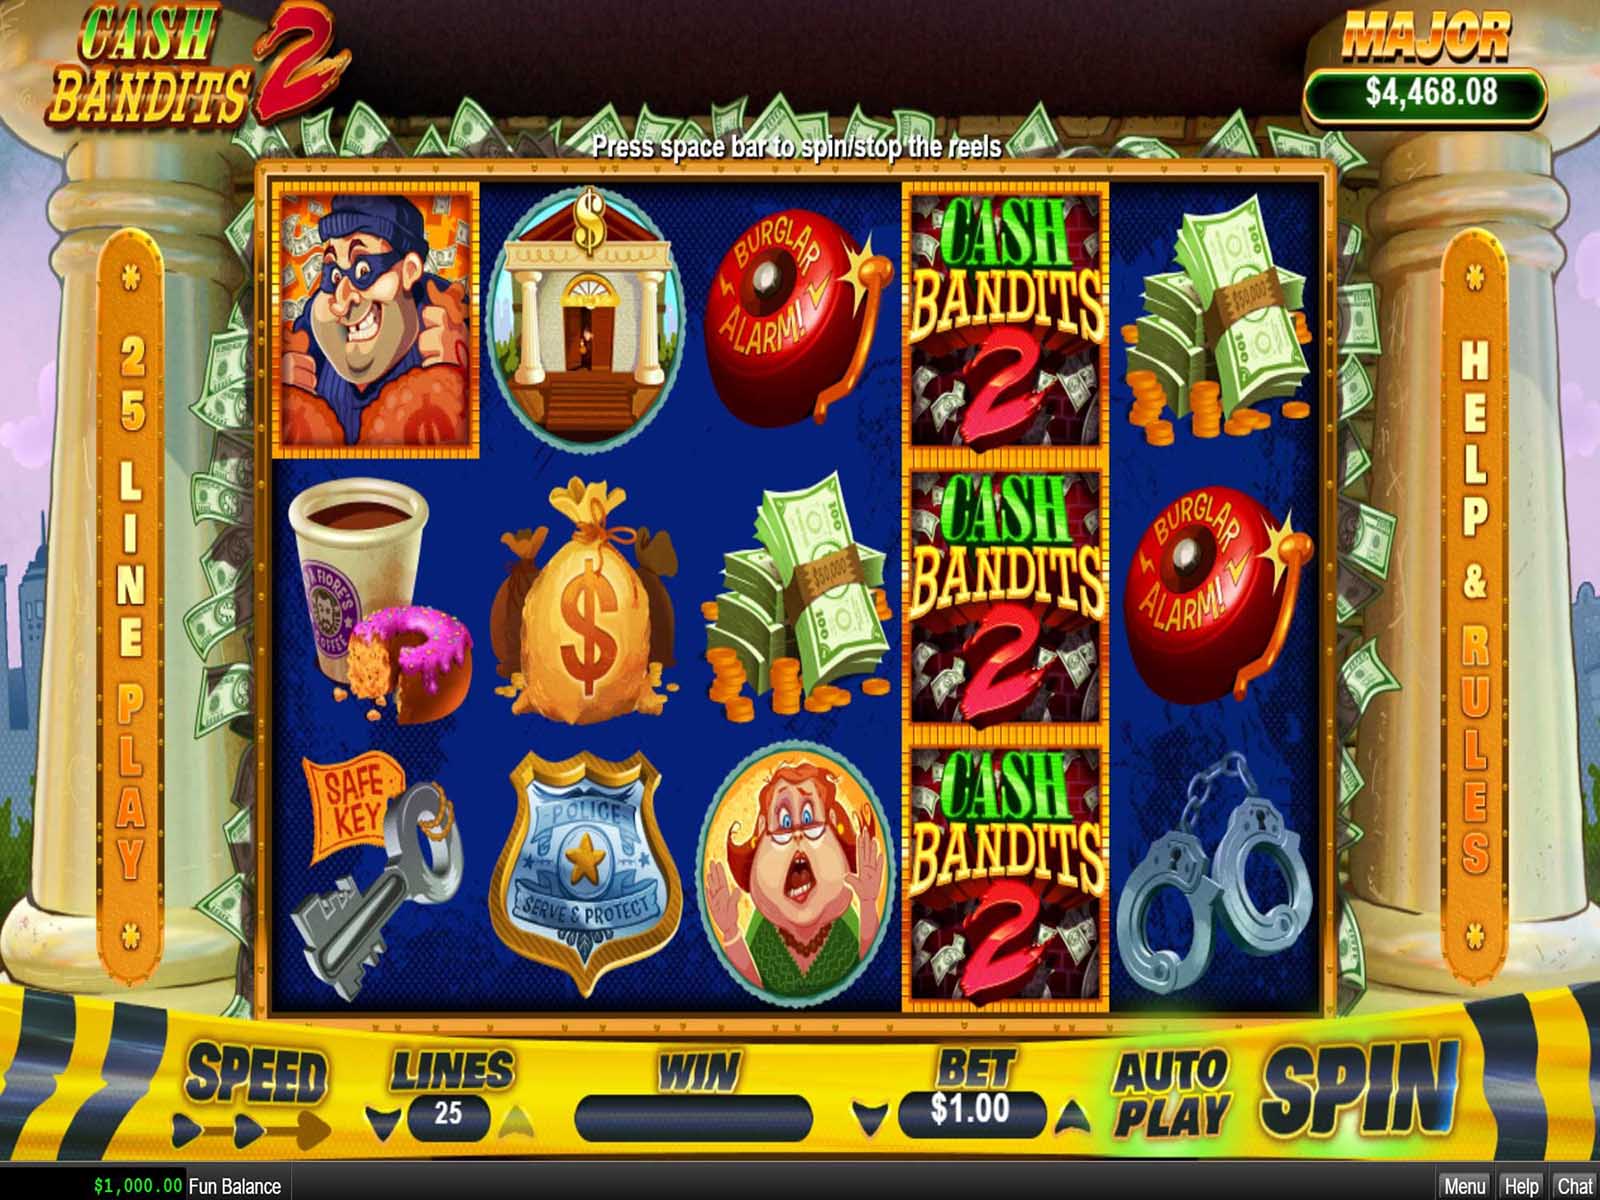 If you're looking for online slots you can play for real money, we got you covered. Here's the best ones to try out.